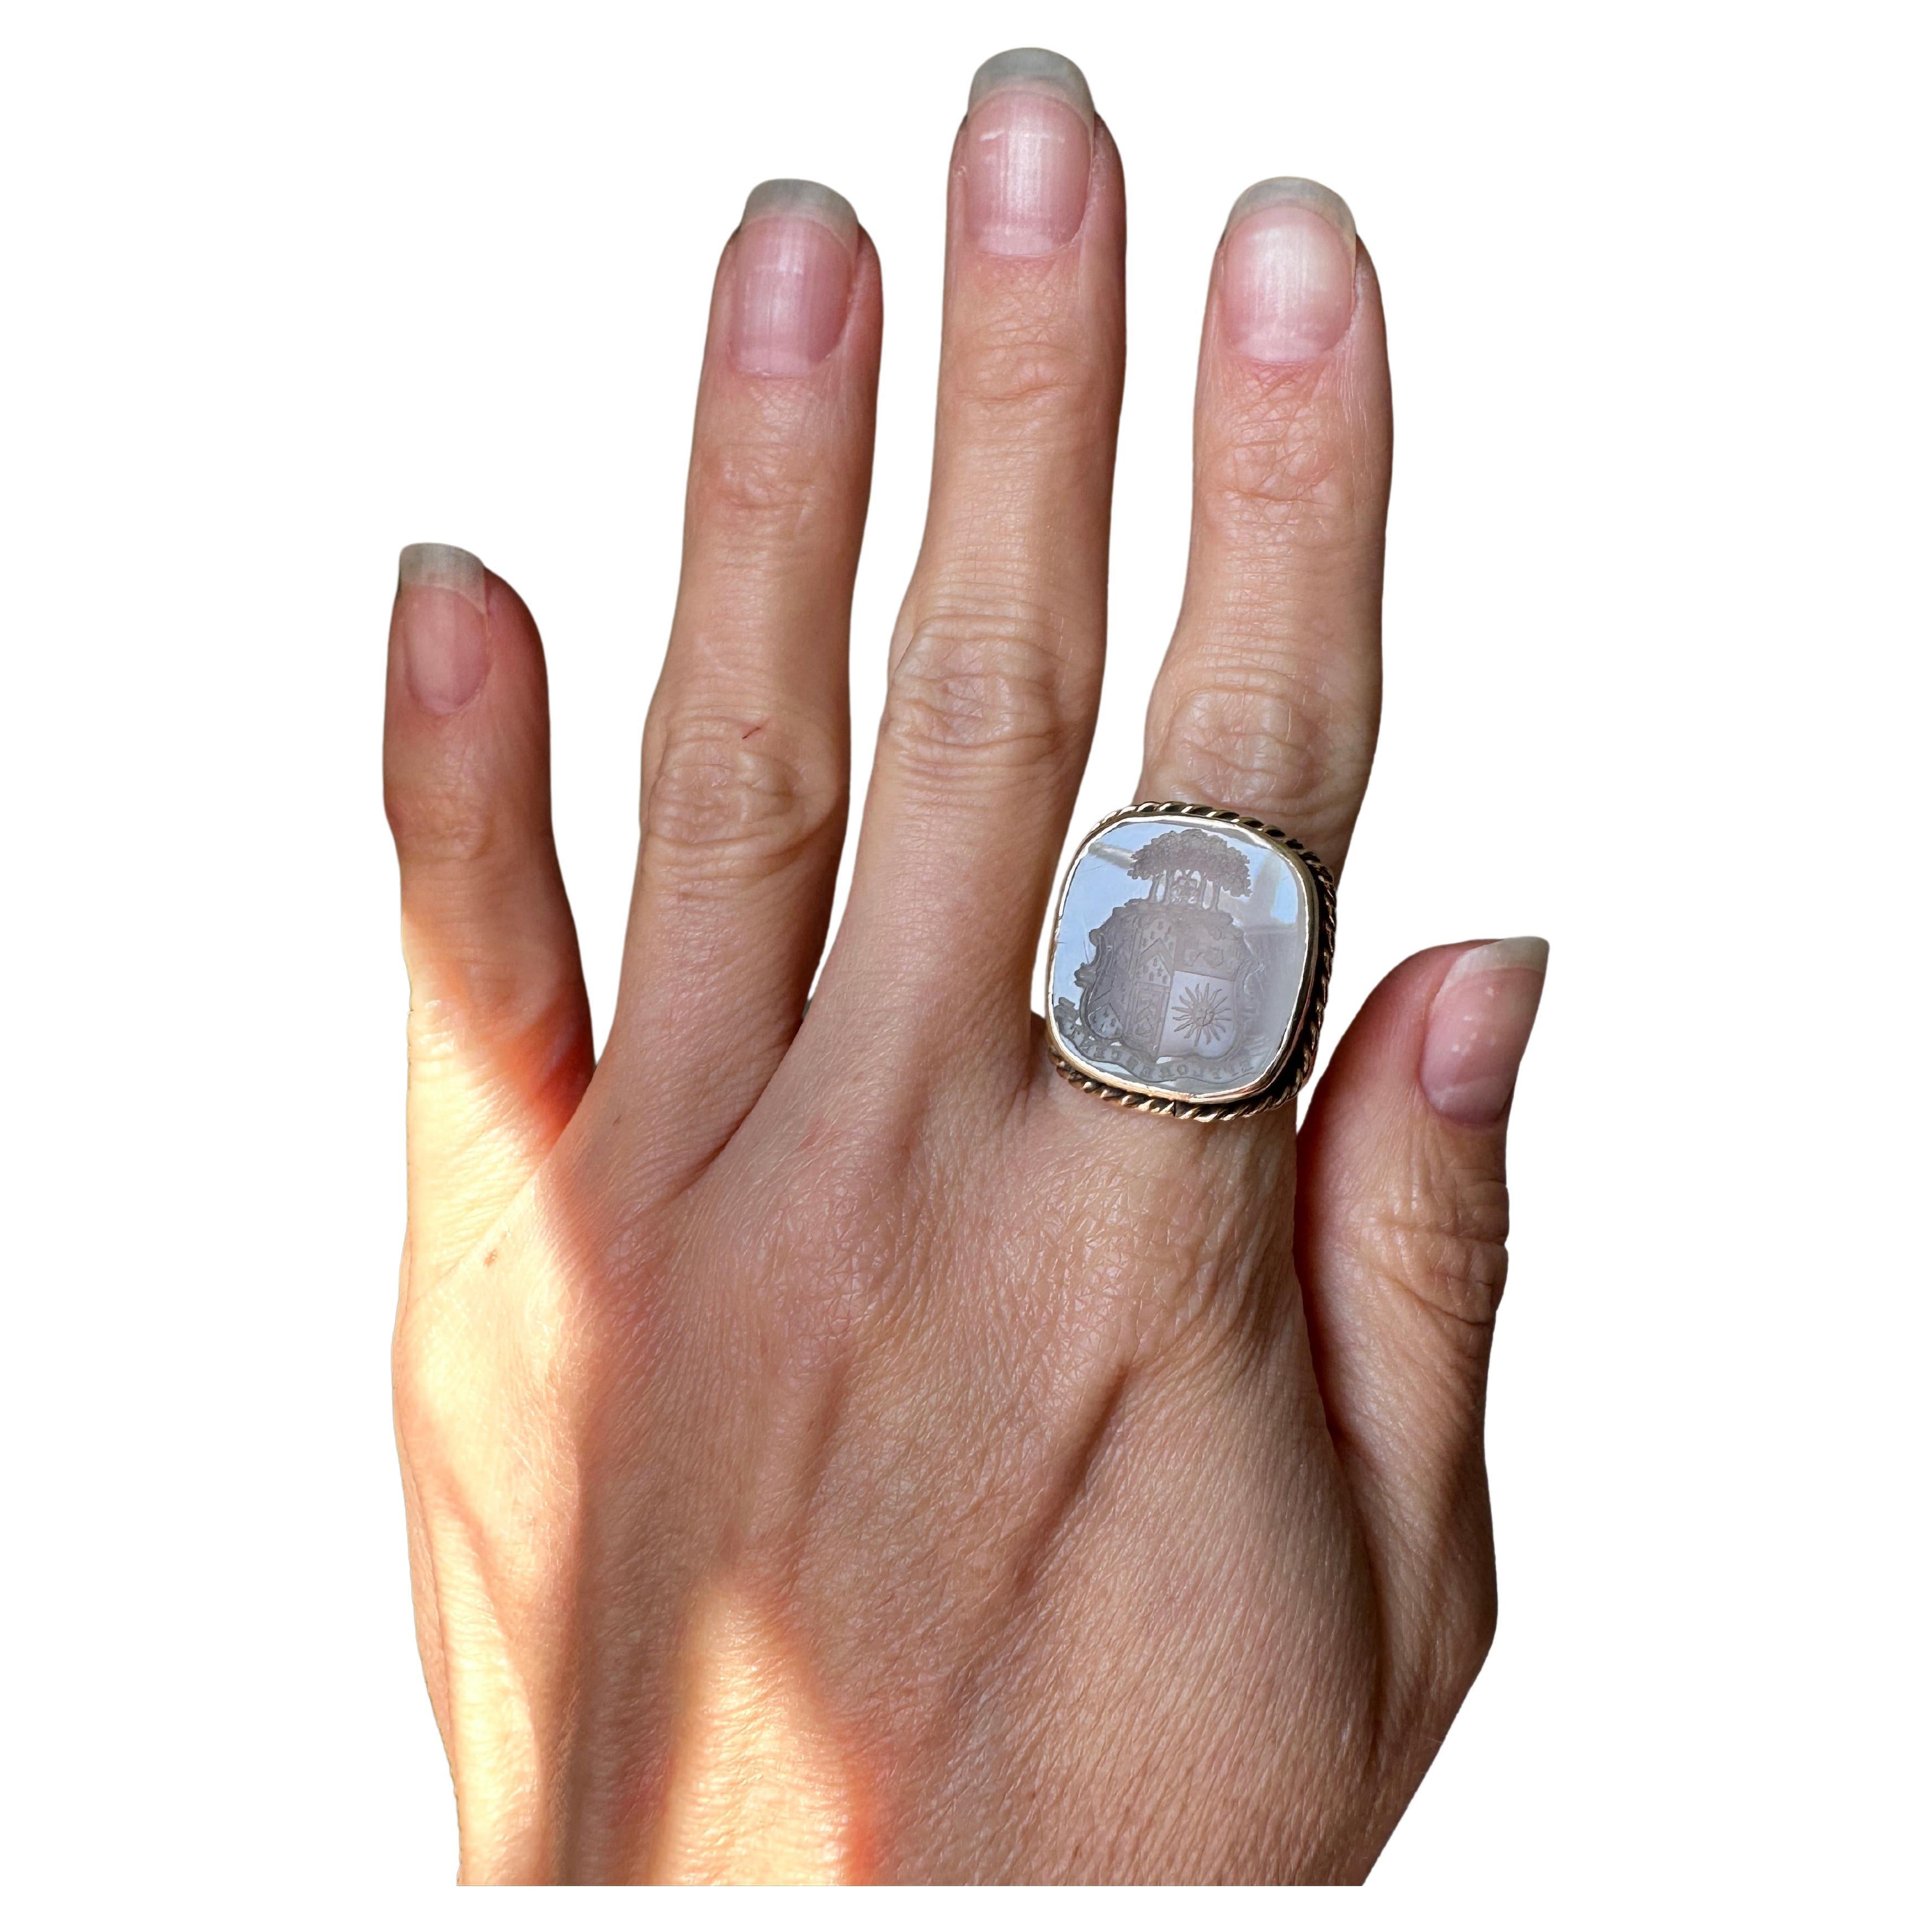 Originally a Victorian era fob converted in antiquity to a ring modeled in 15k gold, a luminous white chalcedony intaglio displays a finely hand-engraved seal filled with captivating details such as a lush thicket of tres, pair of hands, flowers,